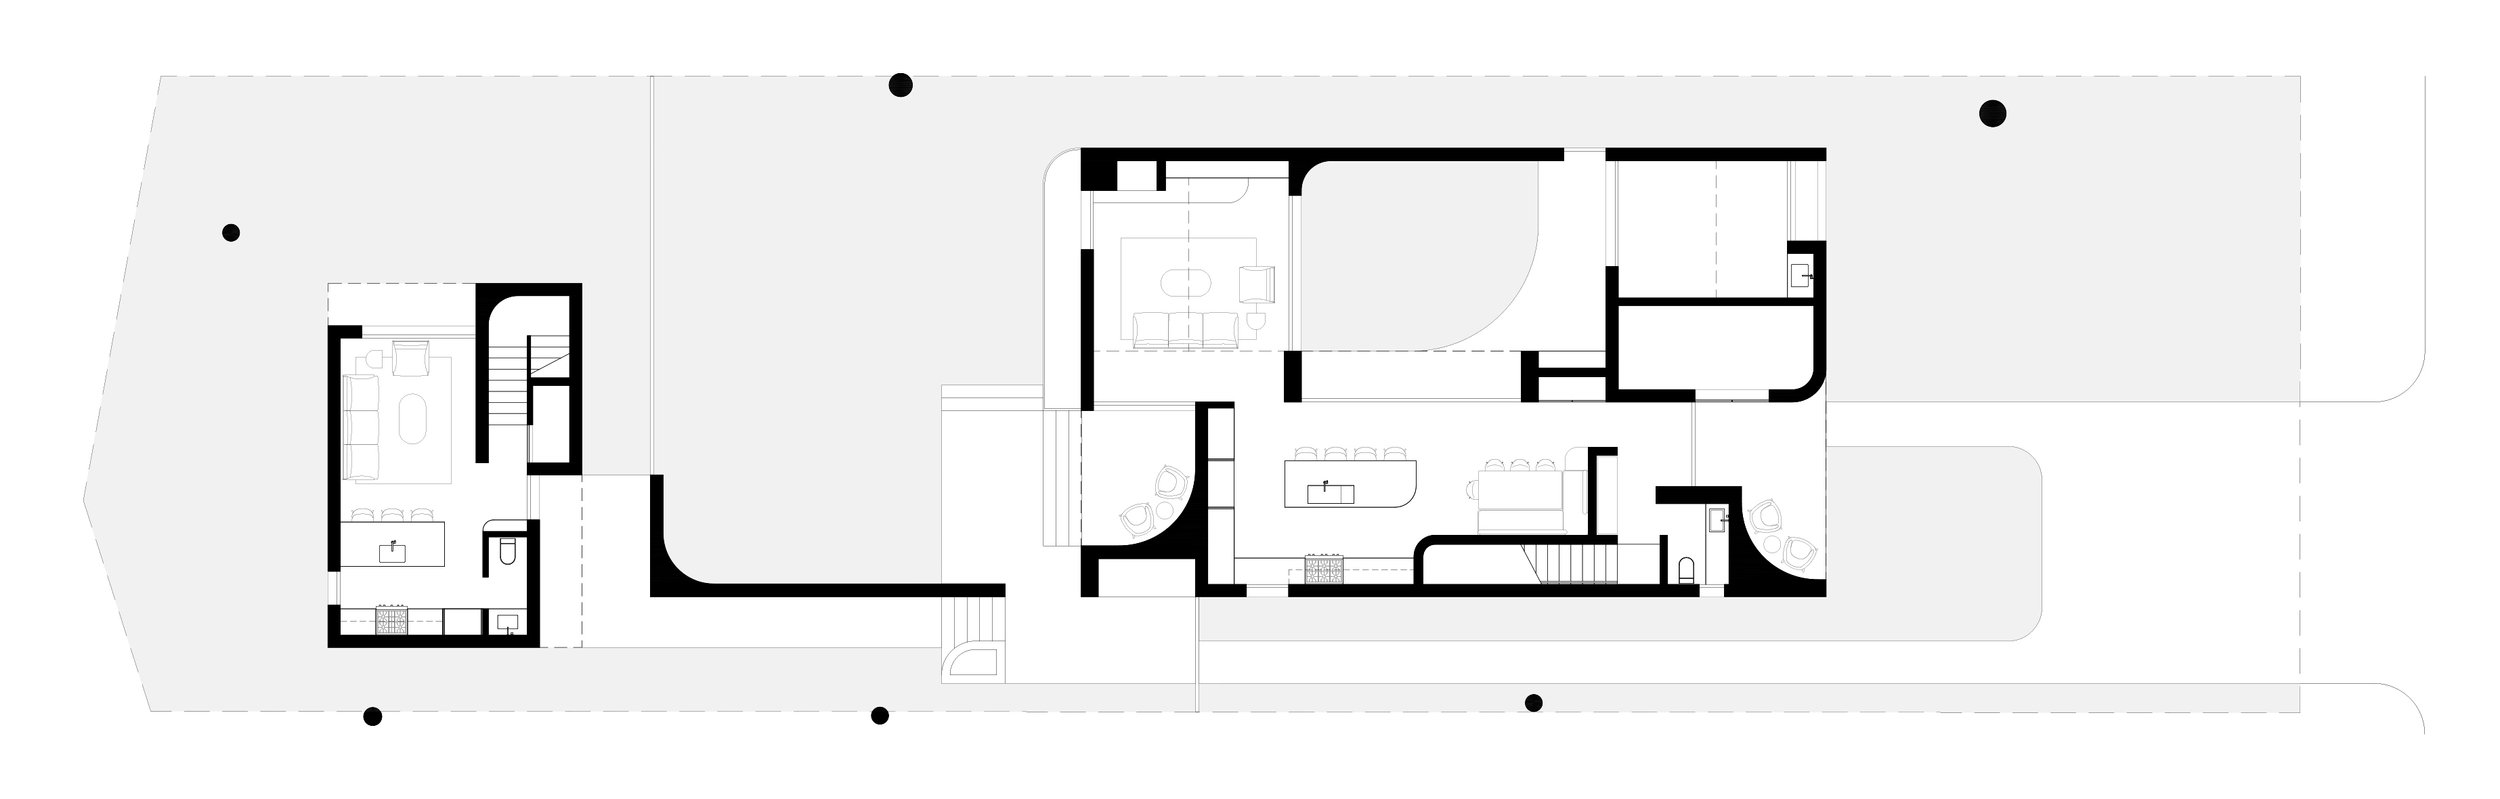 230629_House Courtyard House - Graphic Plans_0002.jpg